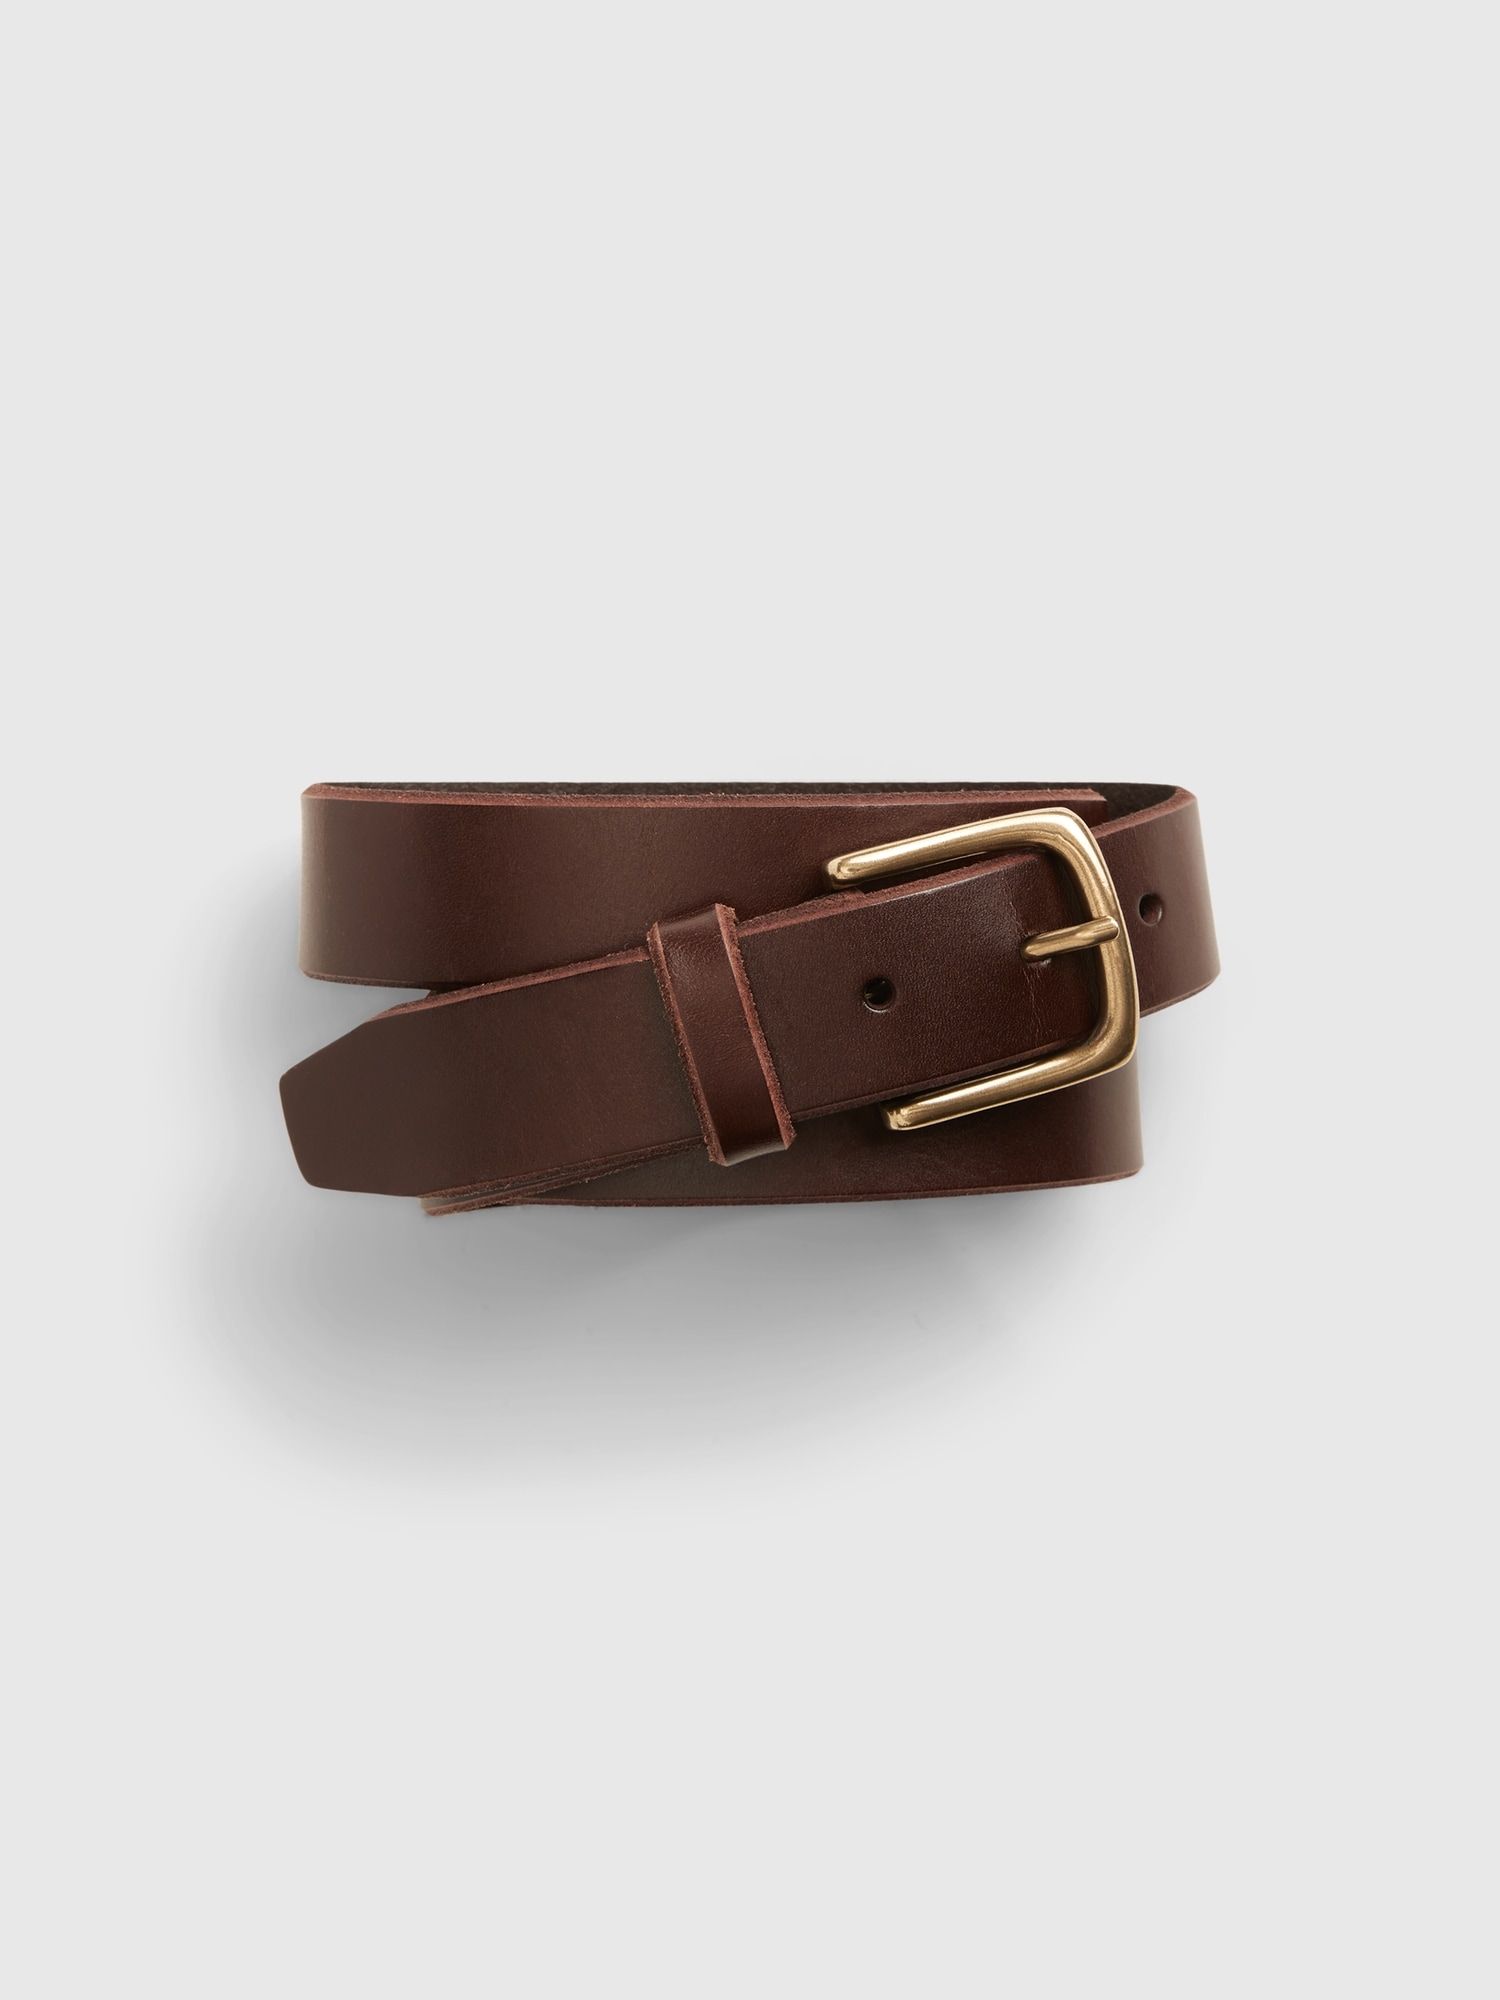 Accessorize in Style: Elevate Your Look with Men’s Belts